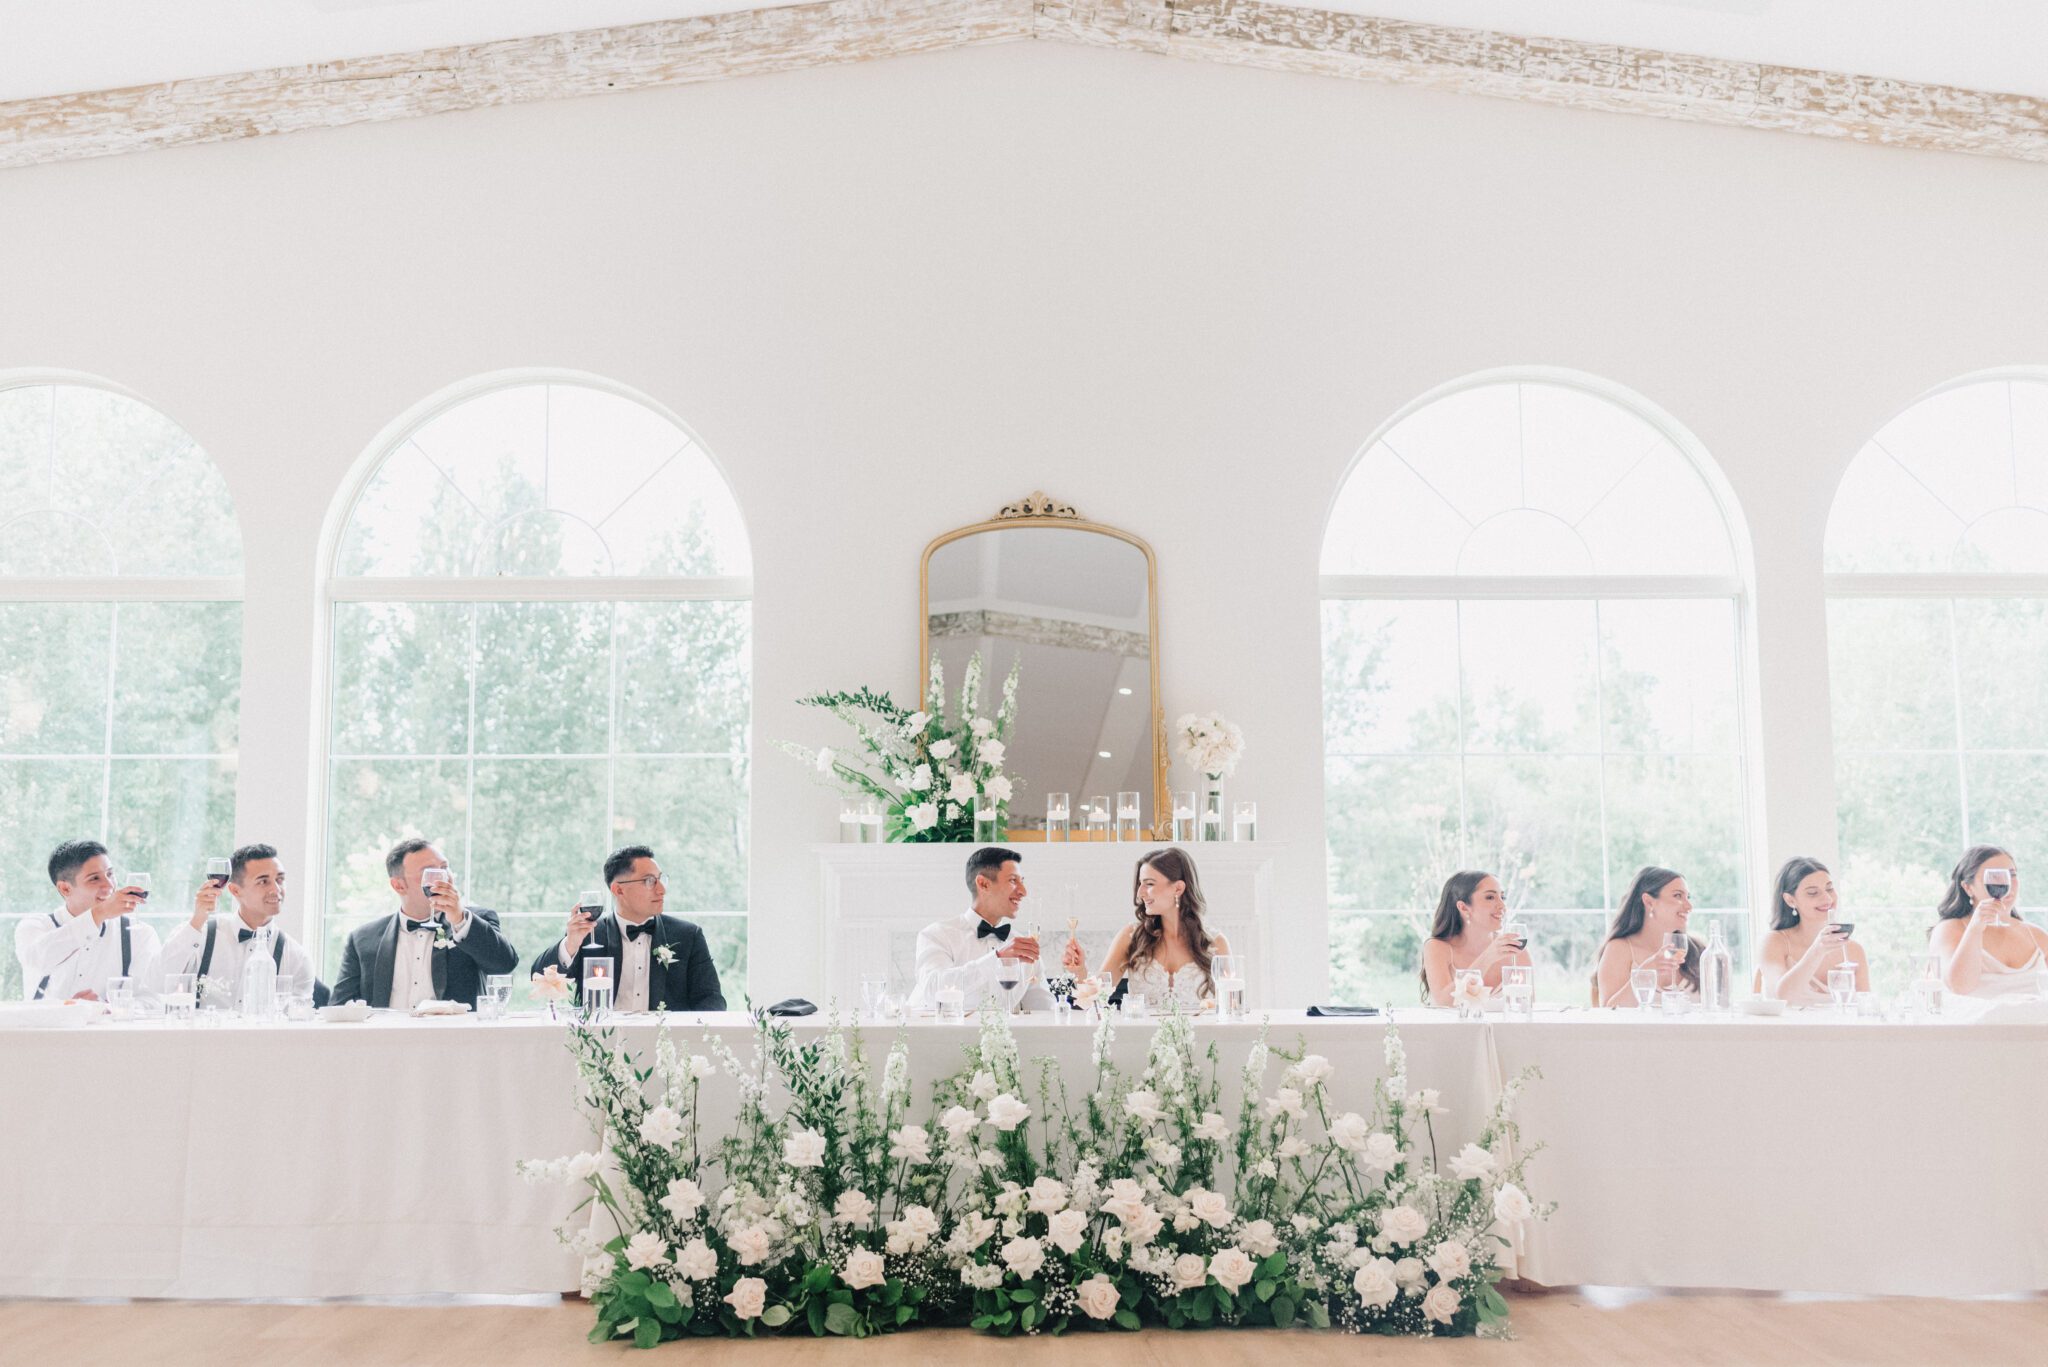 Elegant summer wedding reception at Sparrow Lane Events in Alberta. Summer wedding features white roses, greenery blush decor accents and warm wood tones.